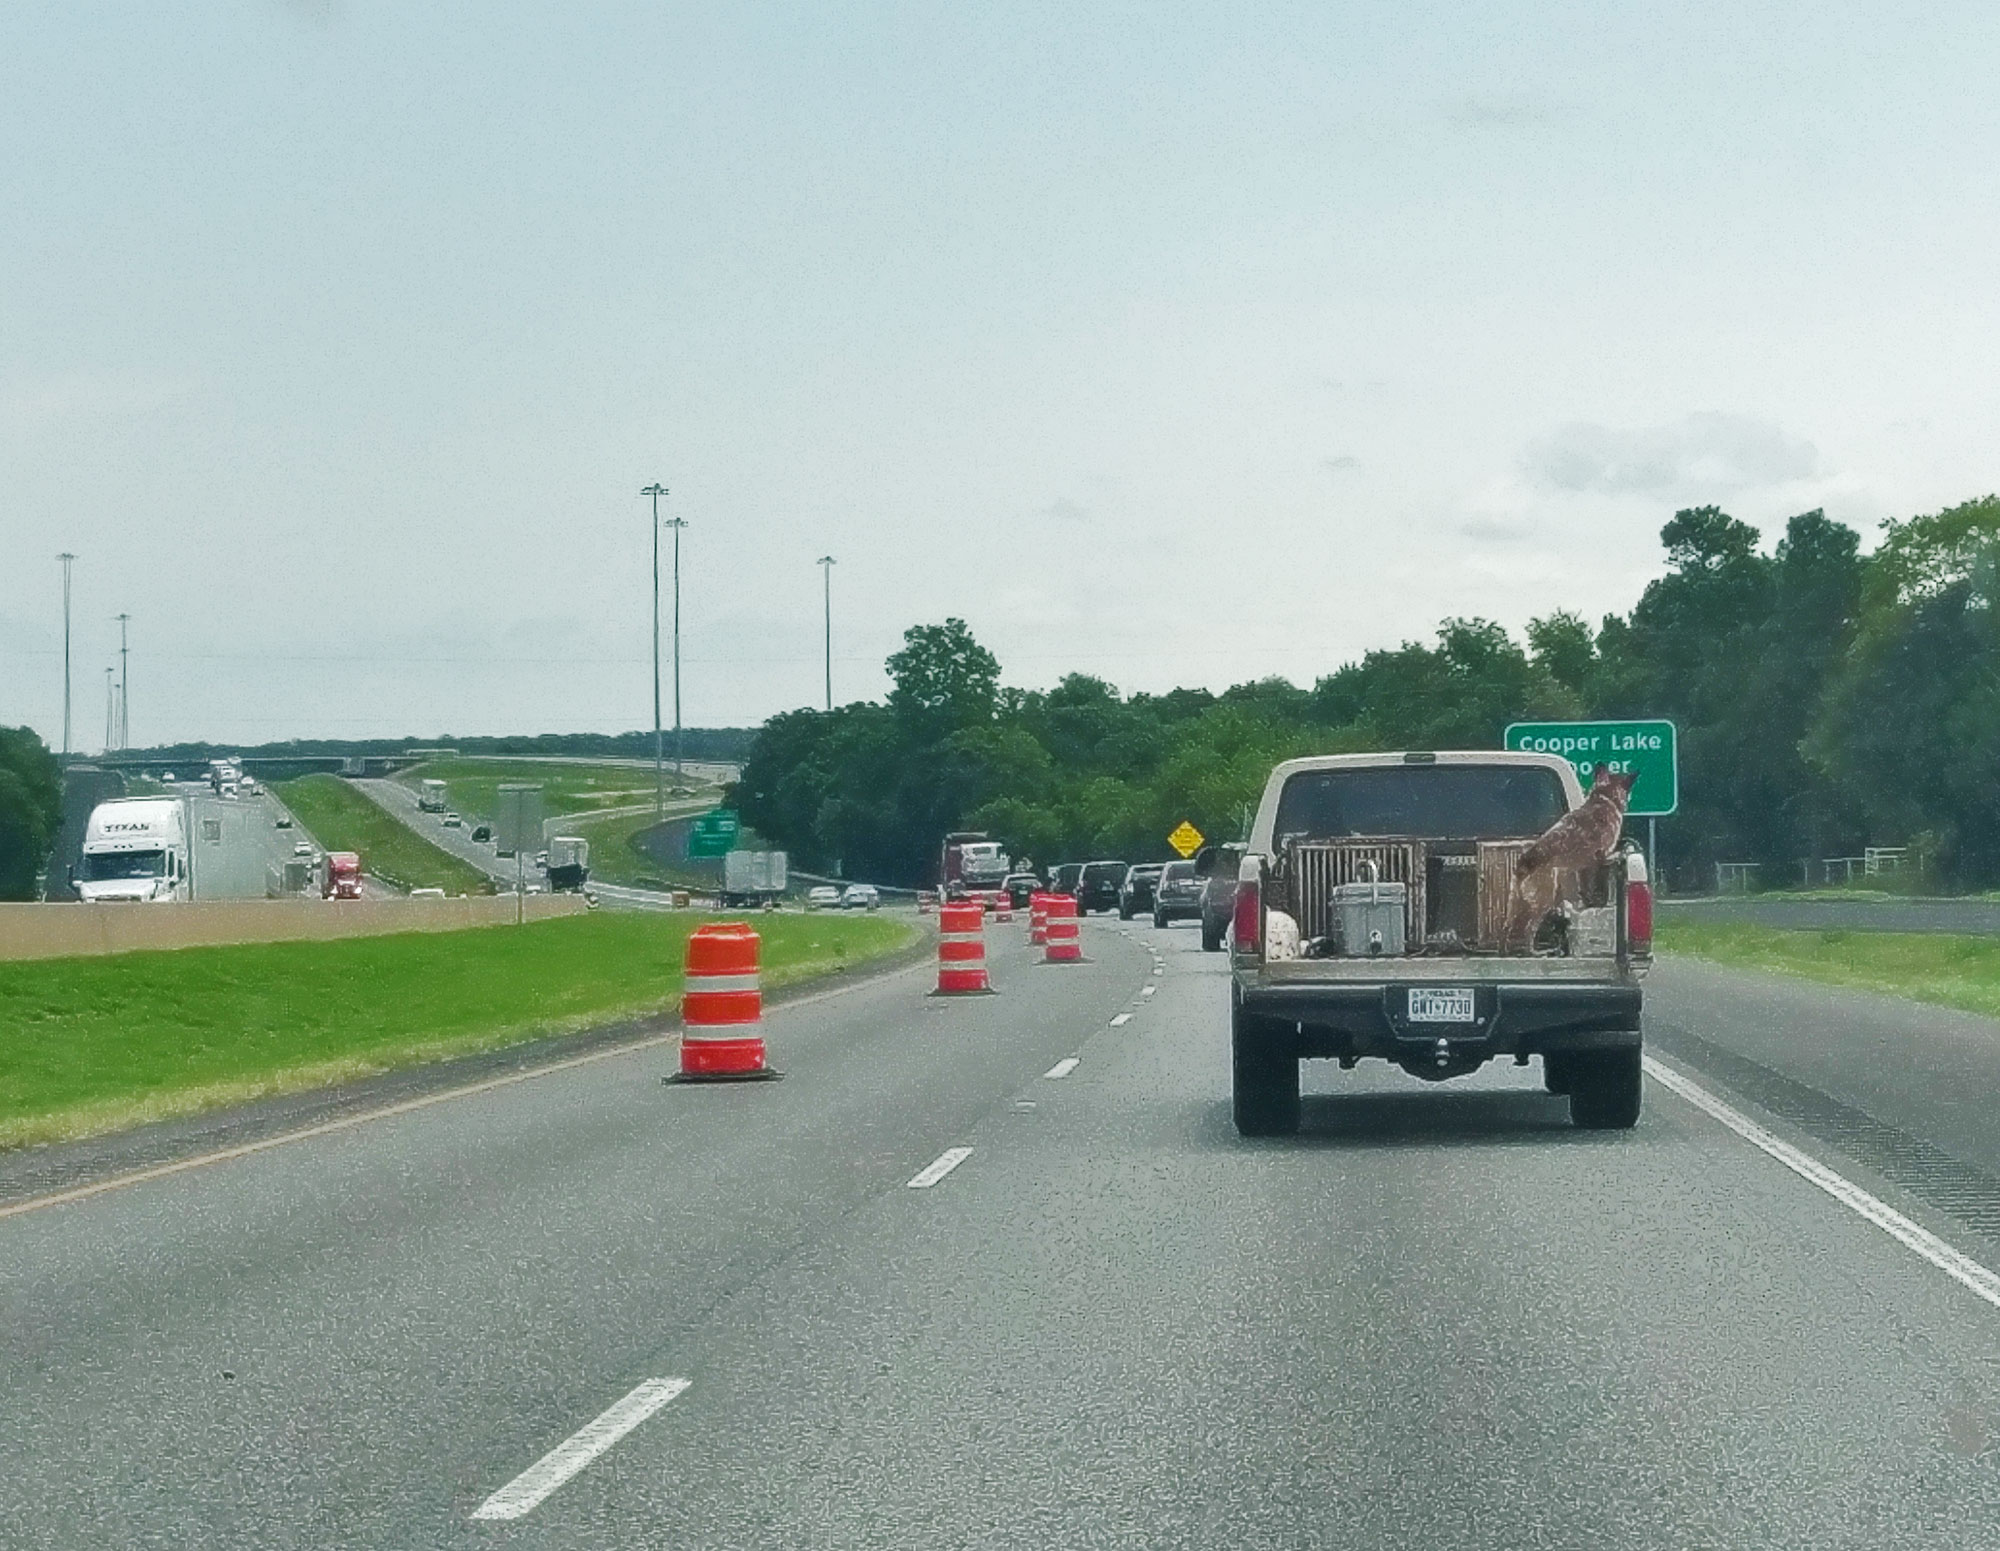 An unleashed dog in the bed of a pickup truck going 80mph on the highway.